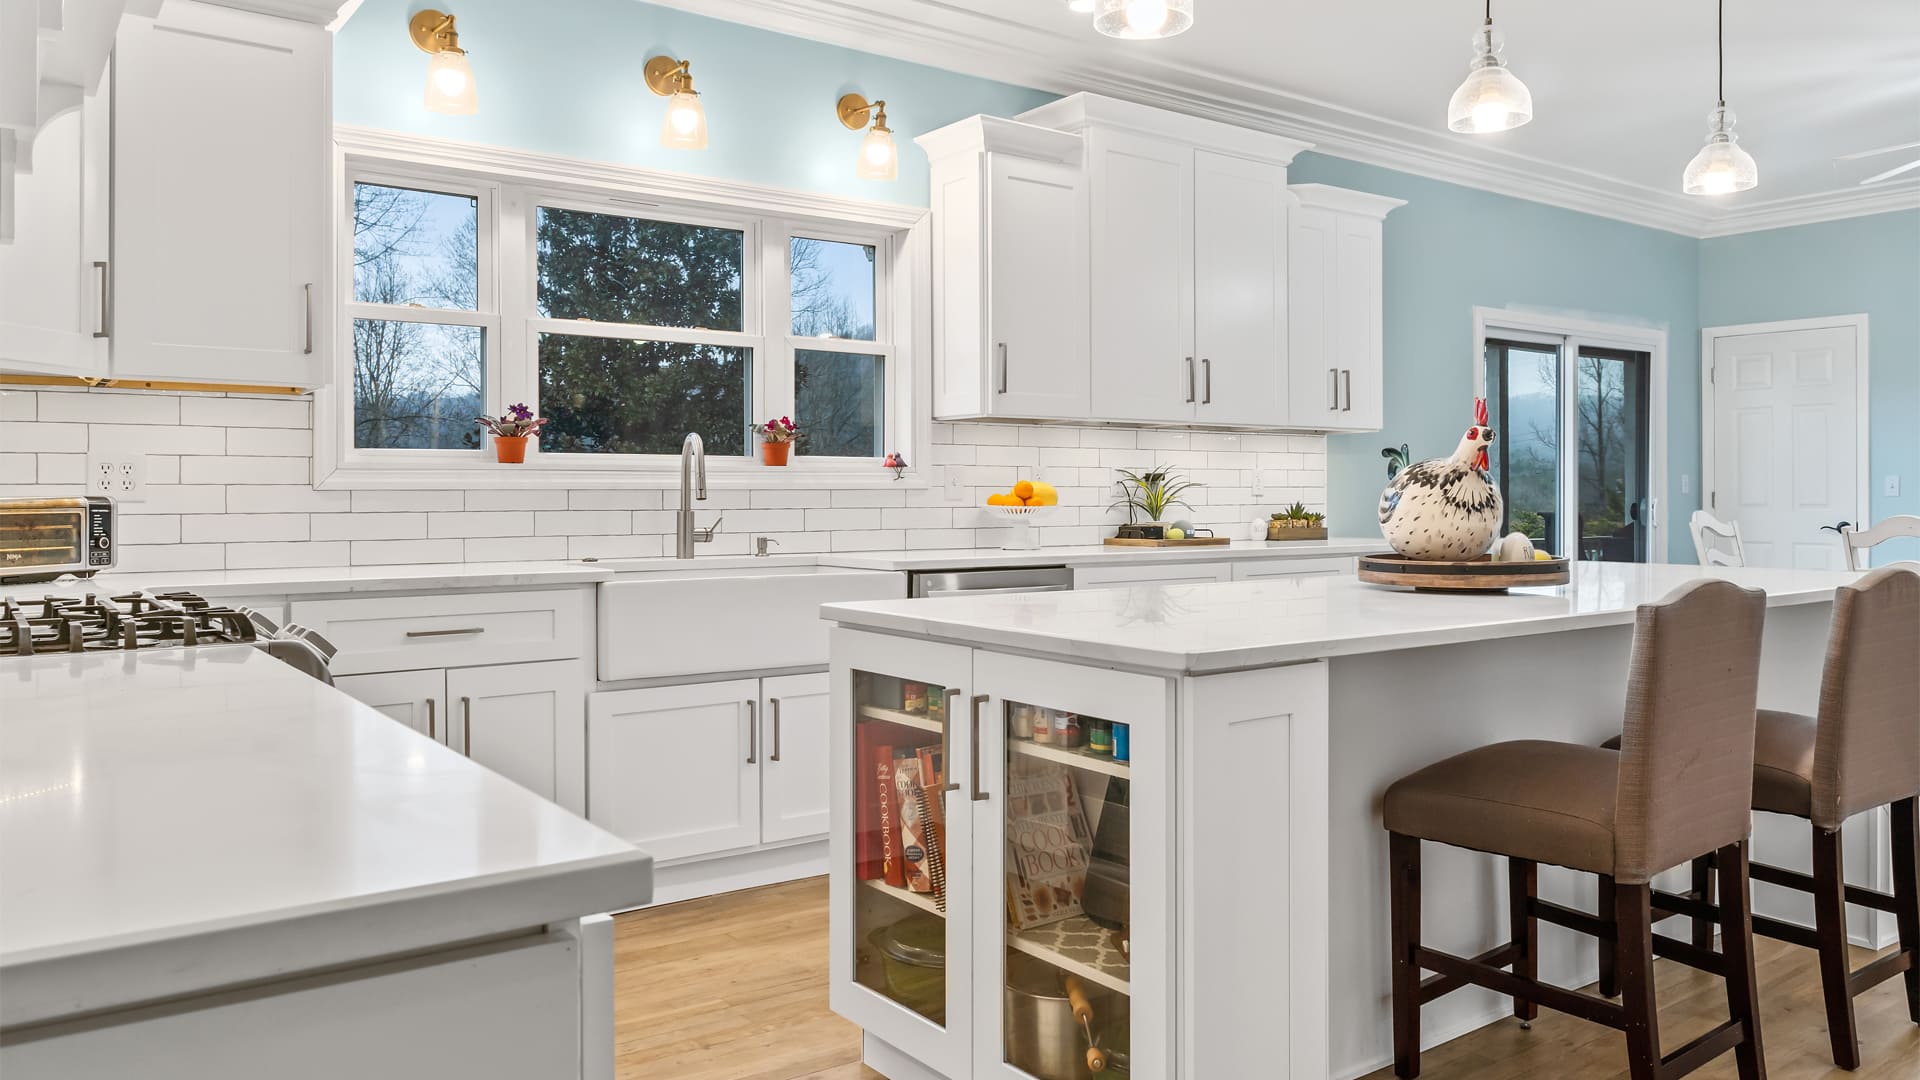 An airy white kitchen remodeled with all white shaker cabinets, white subway tiling, and a white kitchen island with stool seating